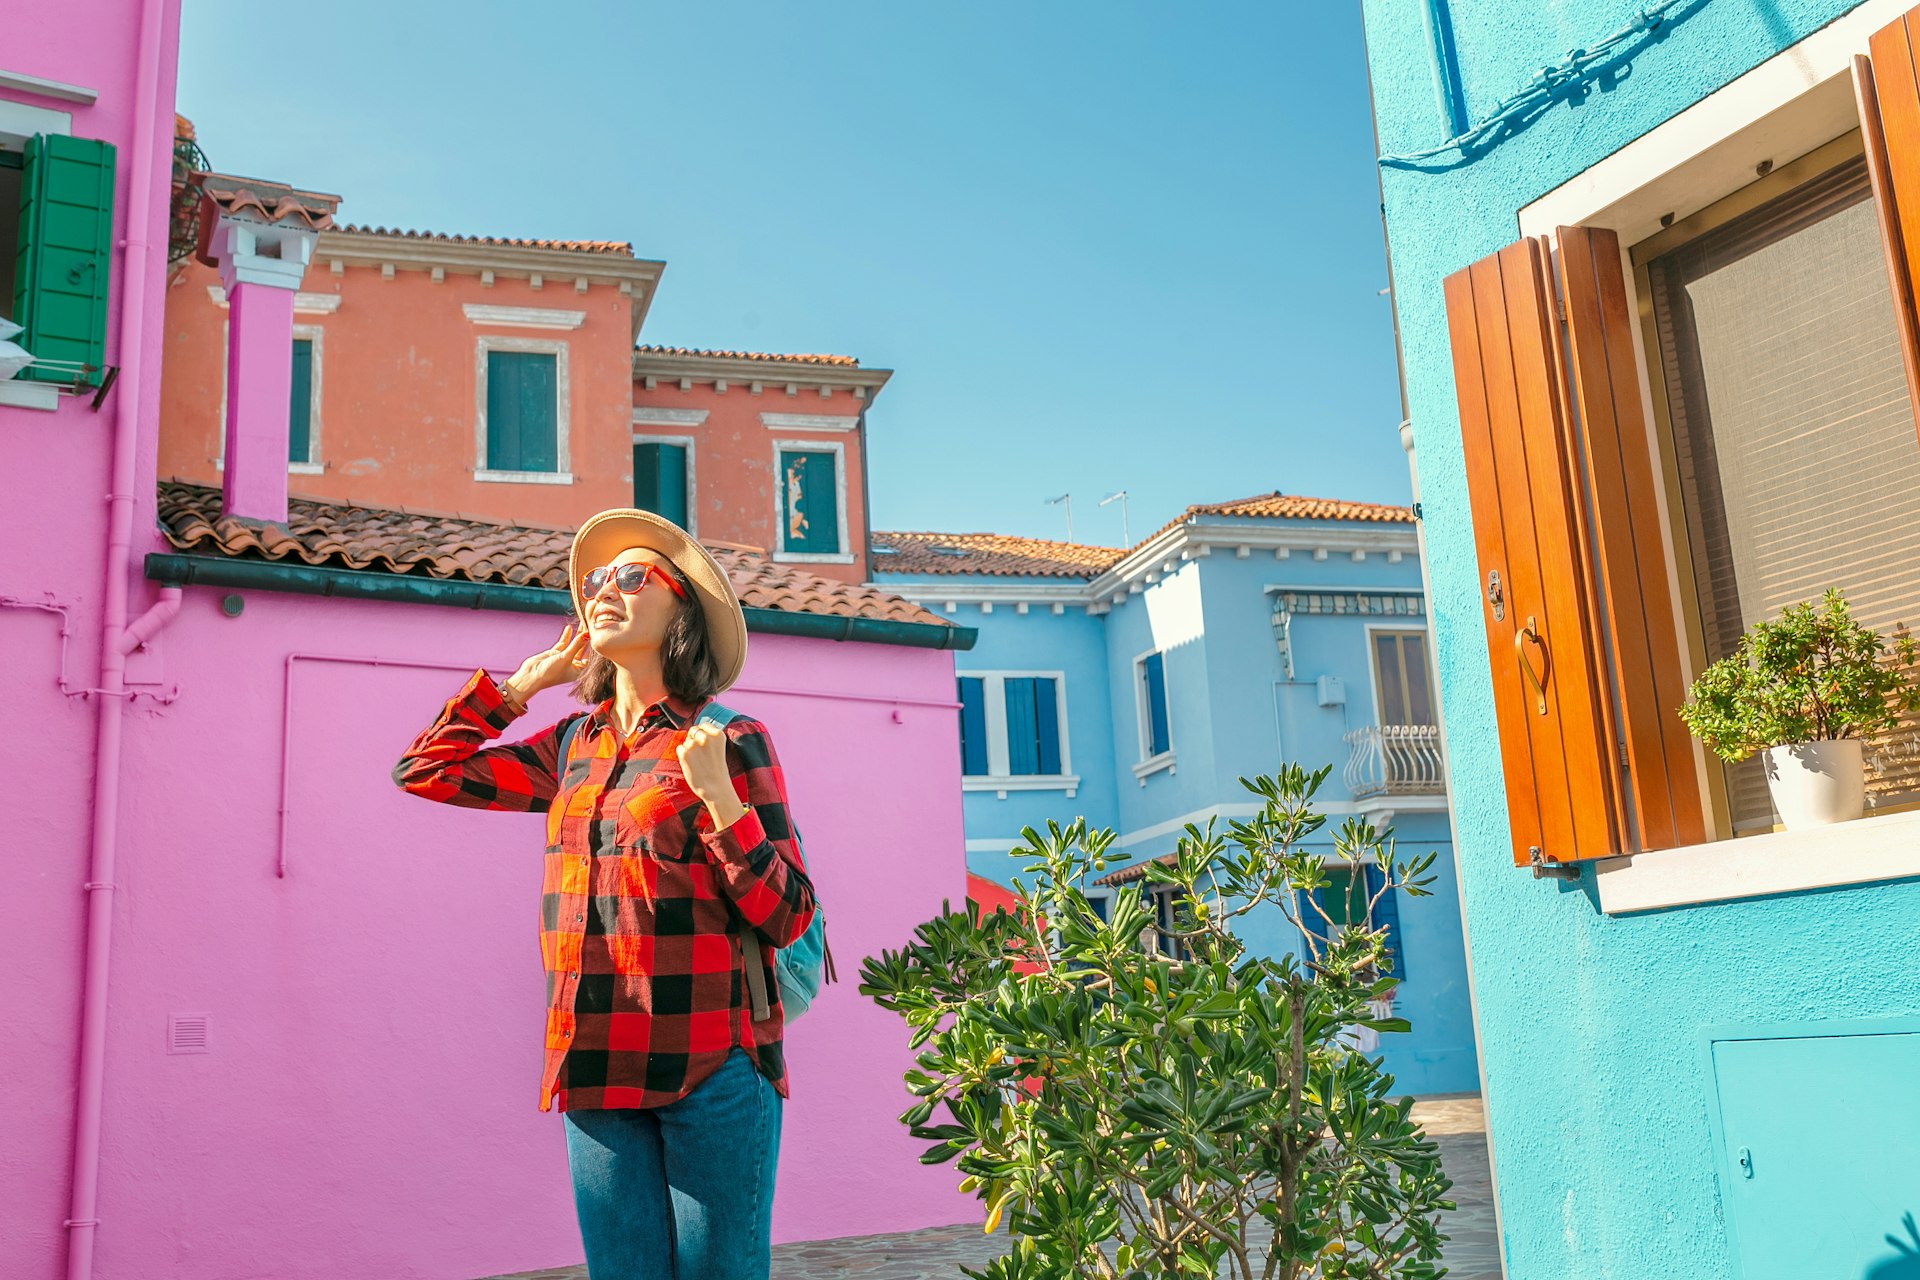 A happy South Asian woman in red sunglasses holds onto her hat in the sunshine as she wanders past the bright pink houses of Burano near Venice, Italy